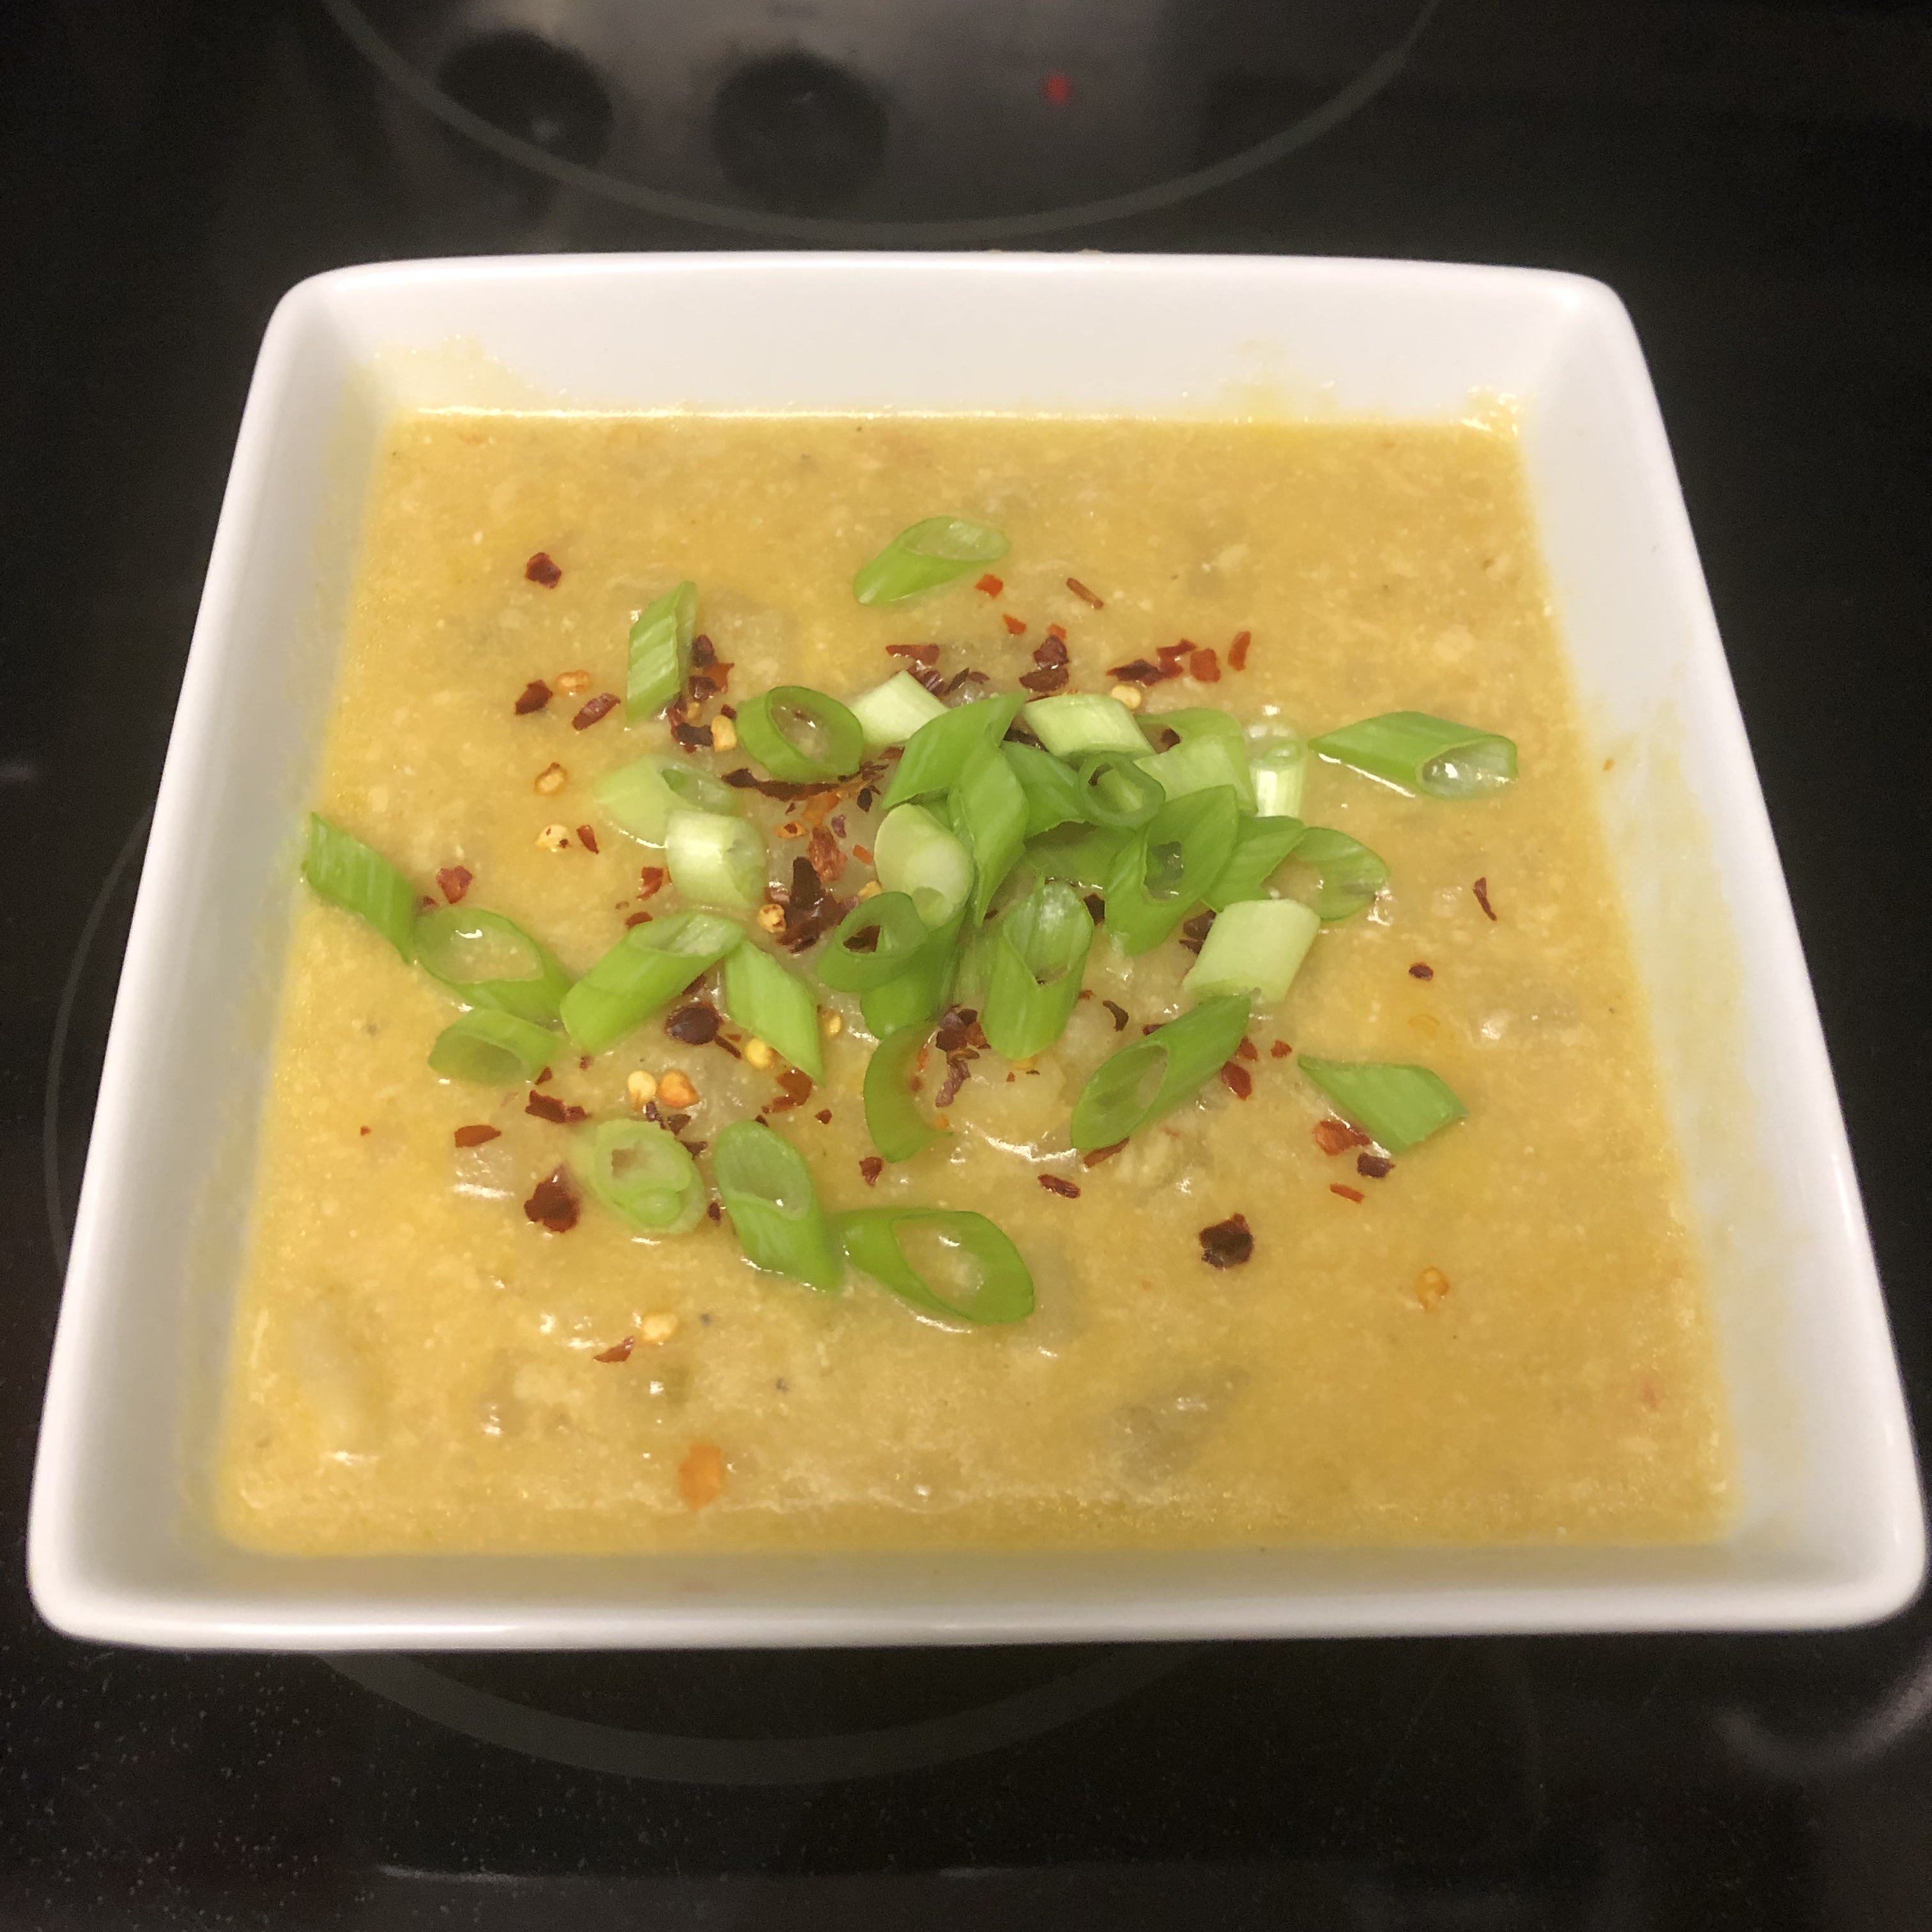 Finished soup garnished with crushed red pepper and scallions